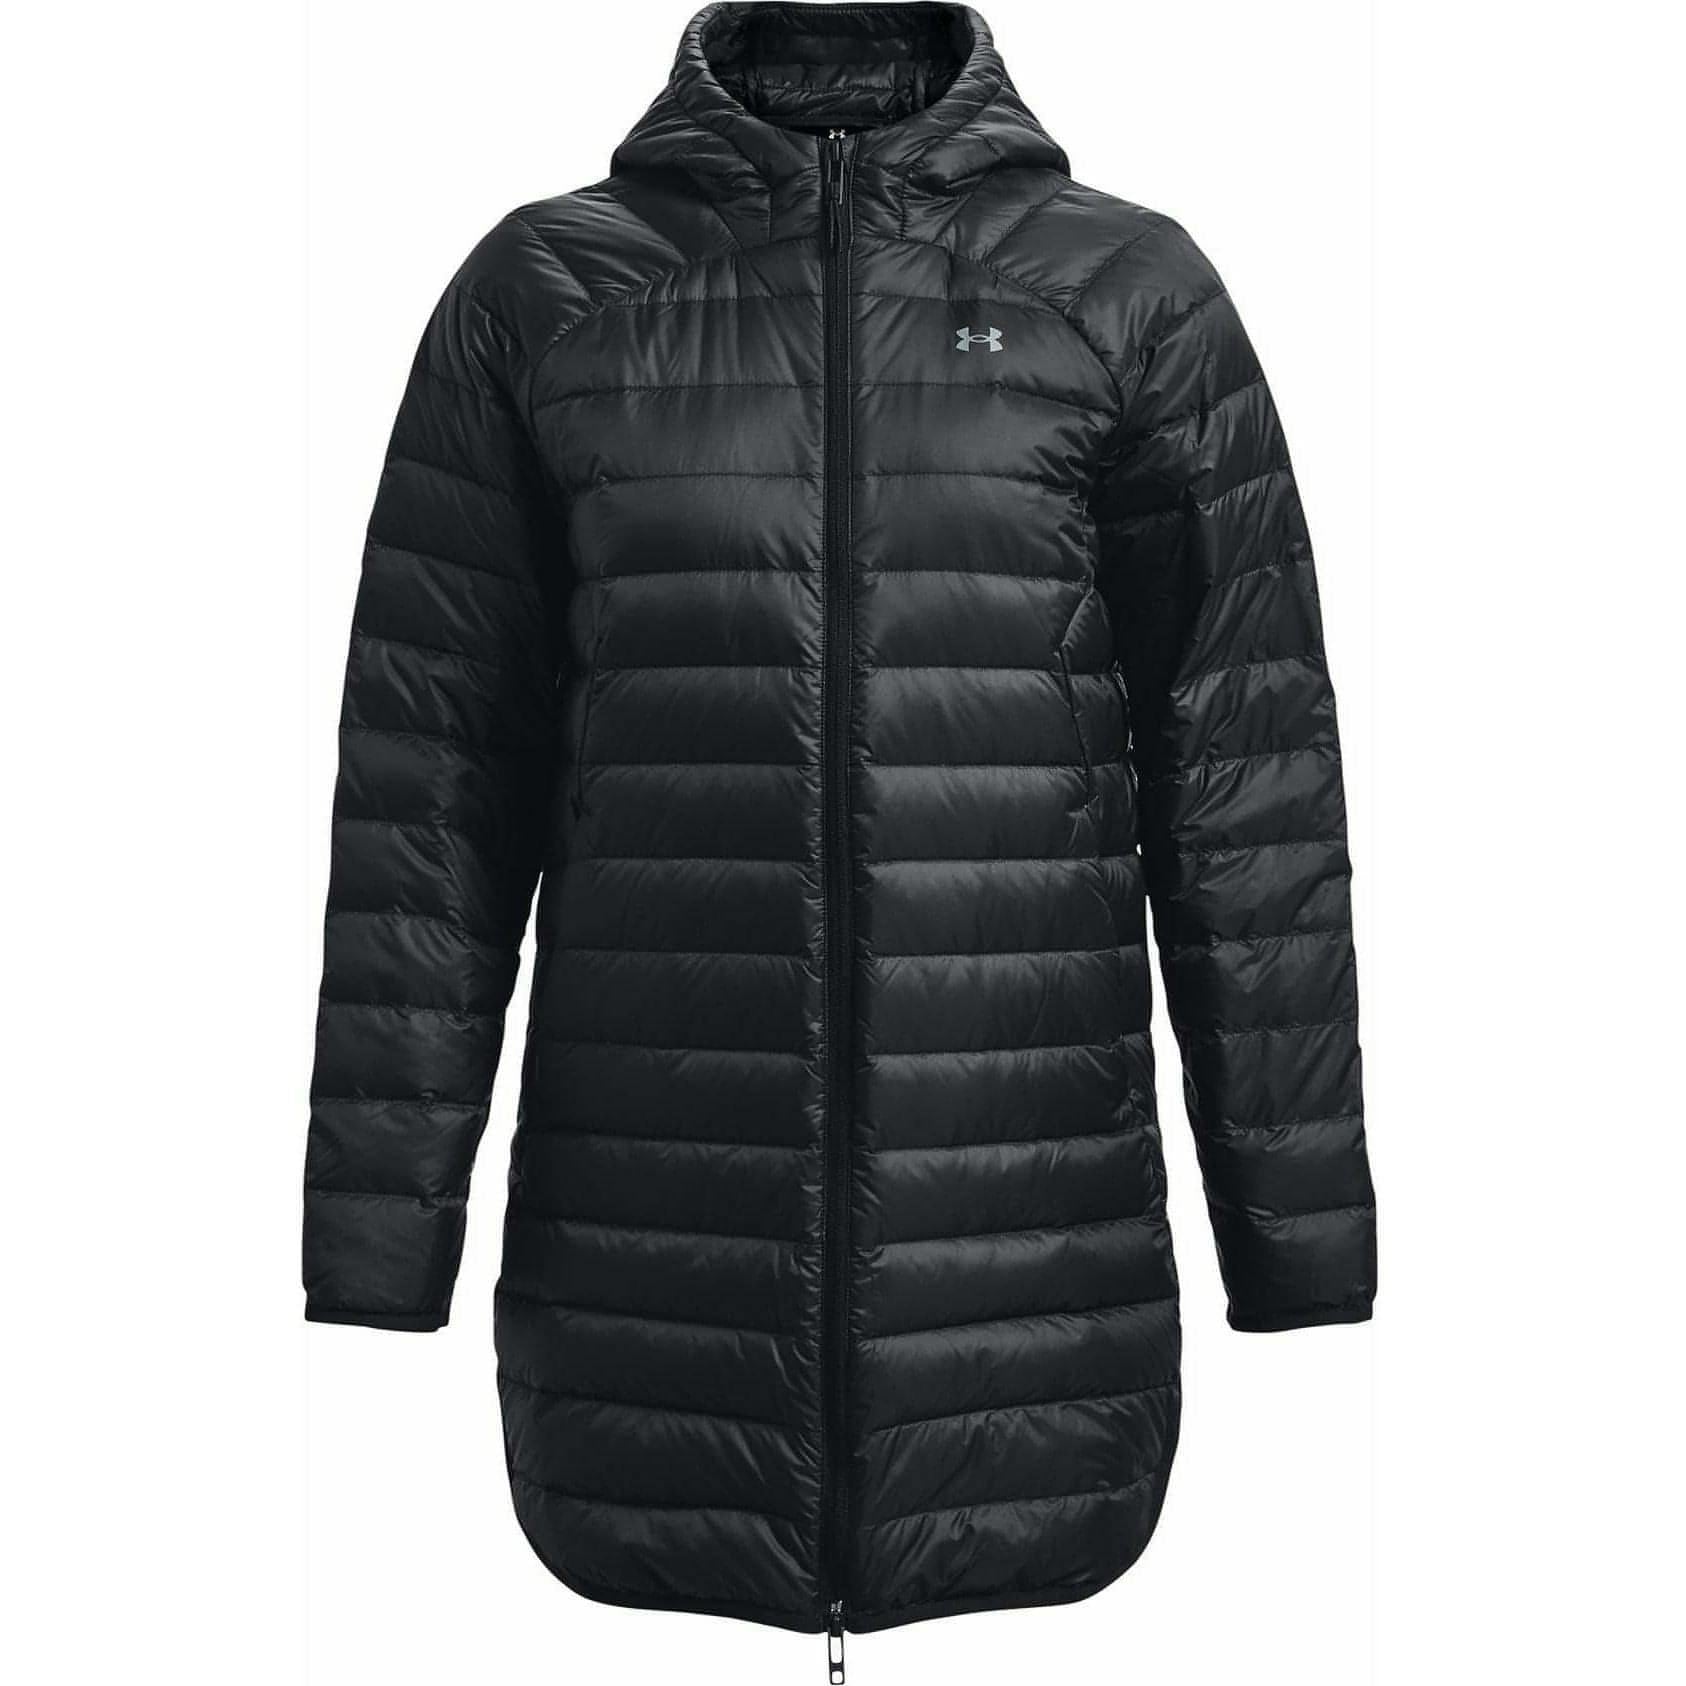 Under Armour Storm Armour 2.0 Womens Down Parka Jacket - Black - Start Fitness